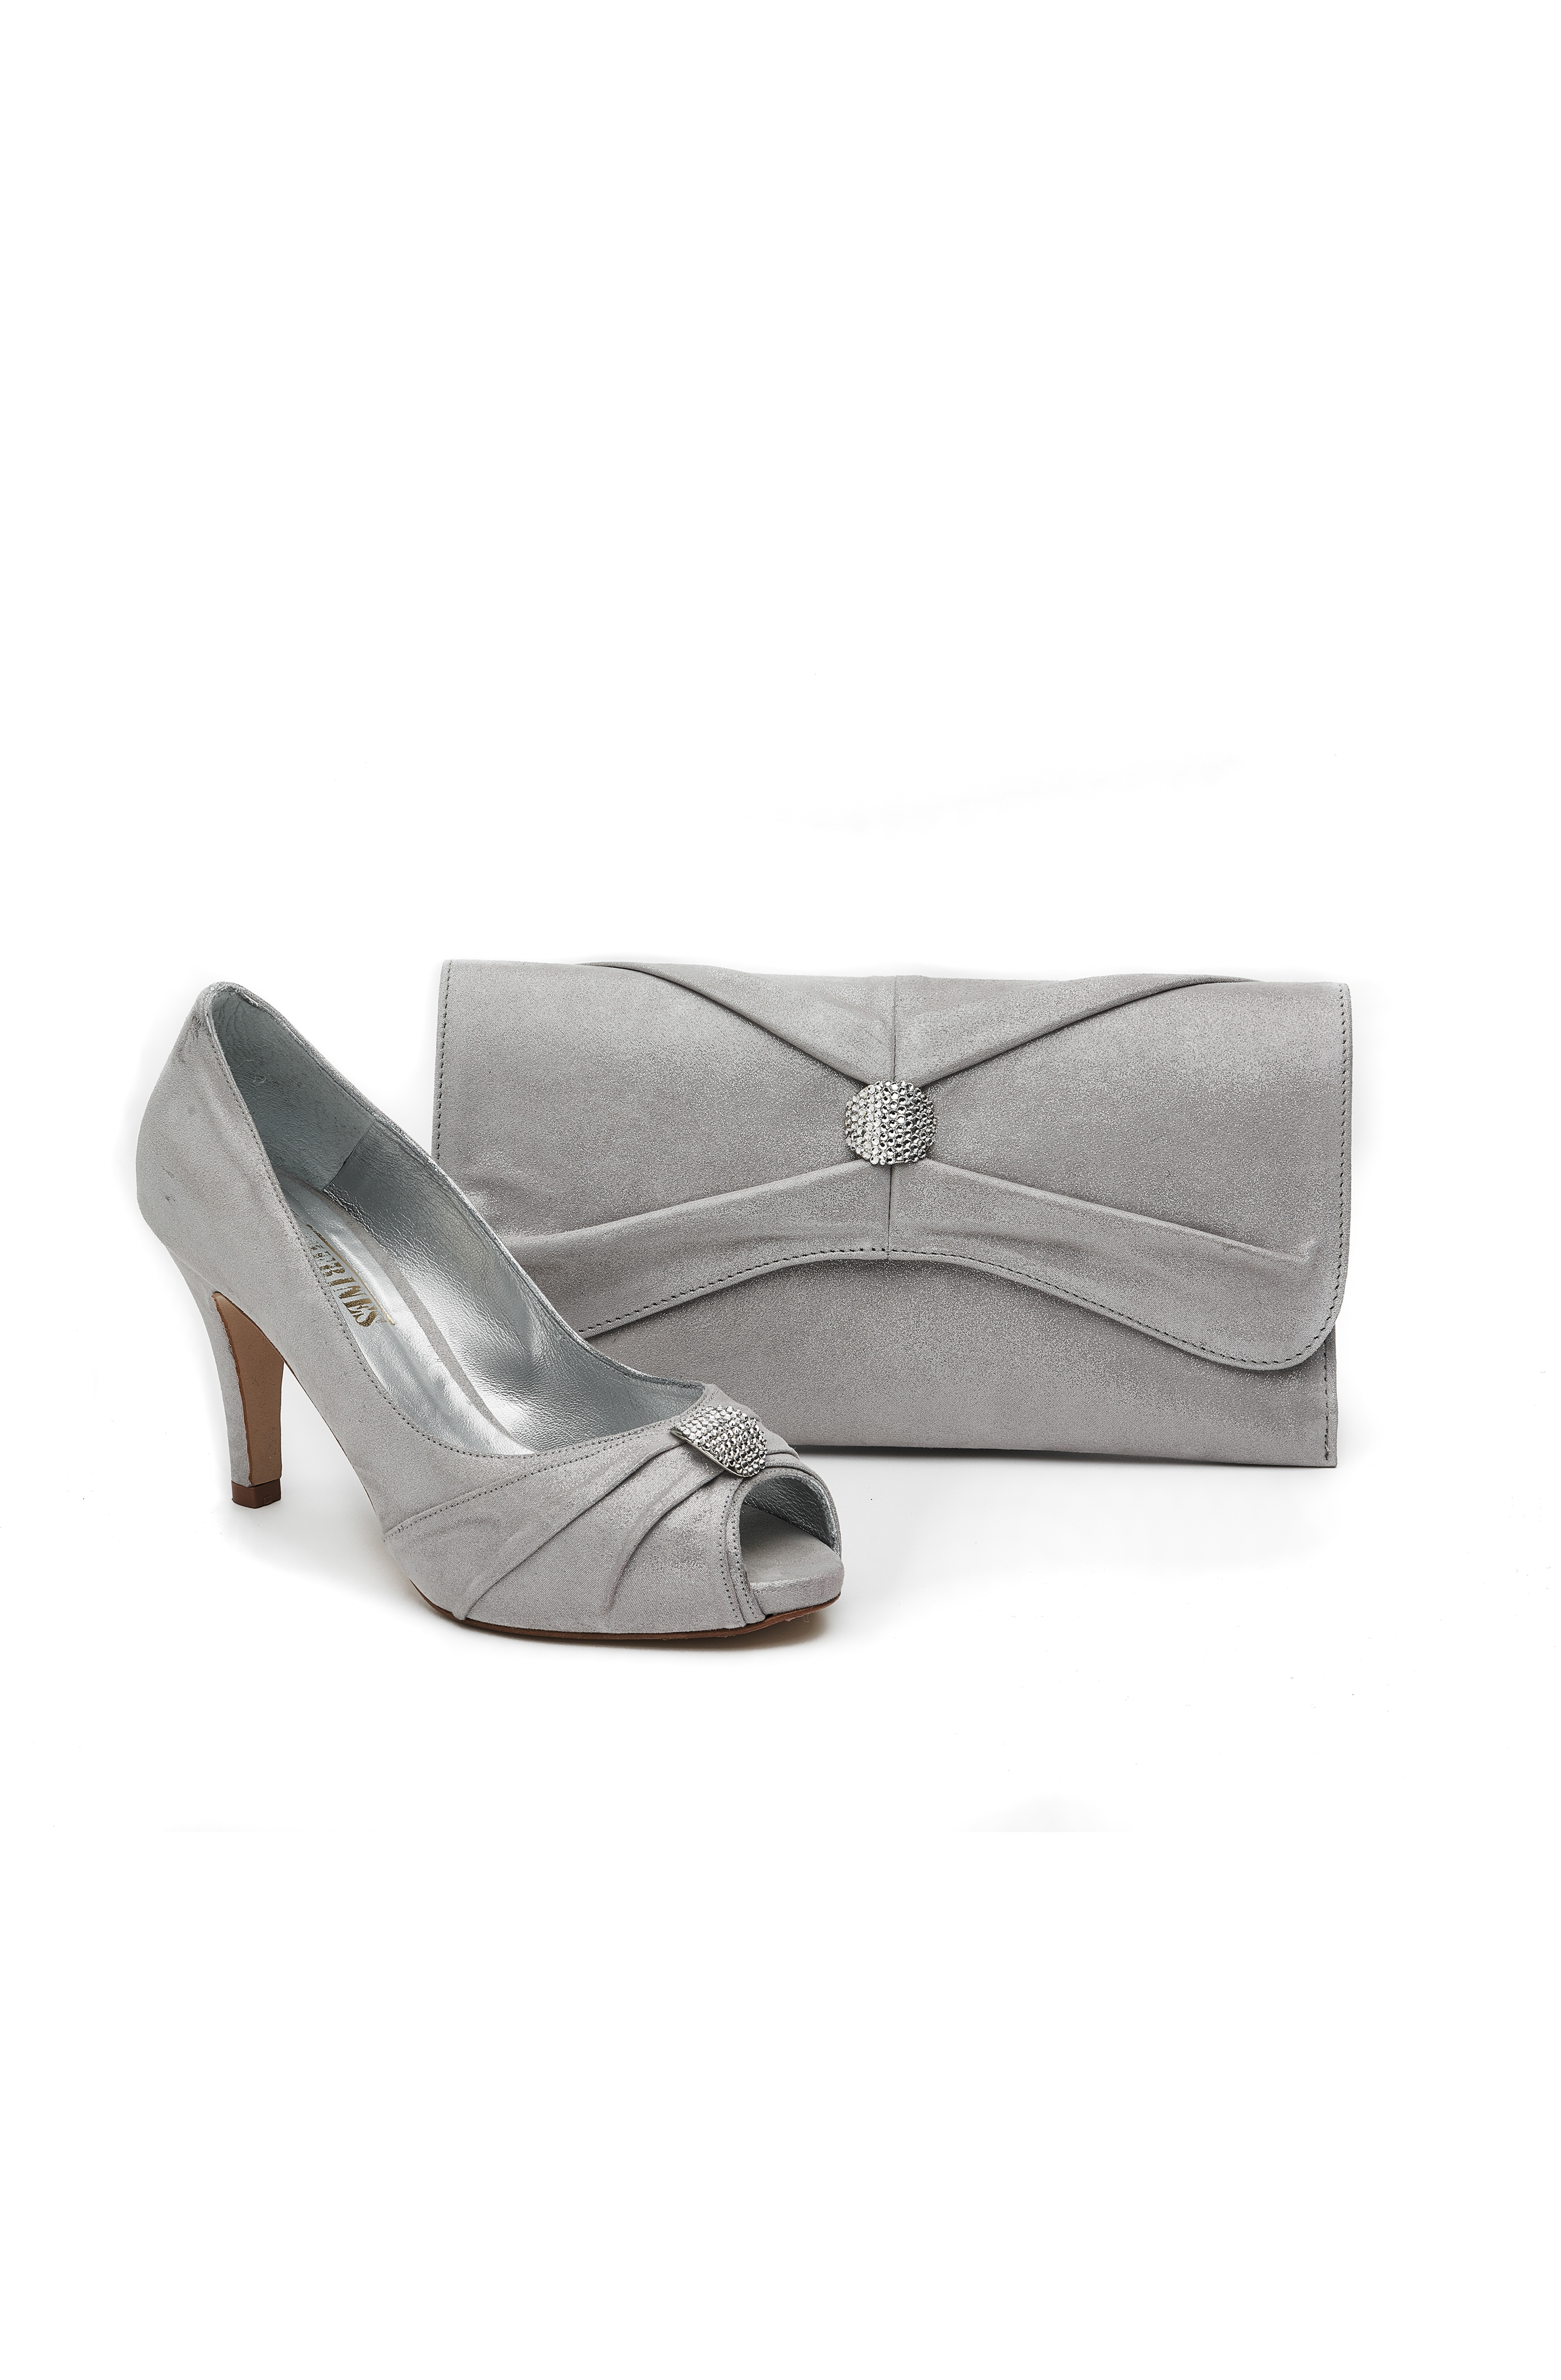 white heels and clutch bag